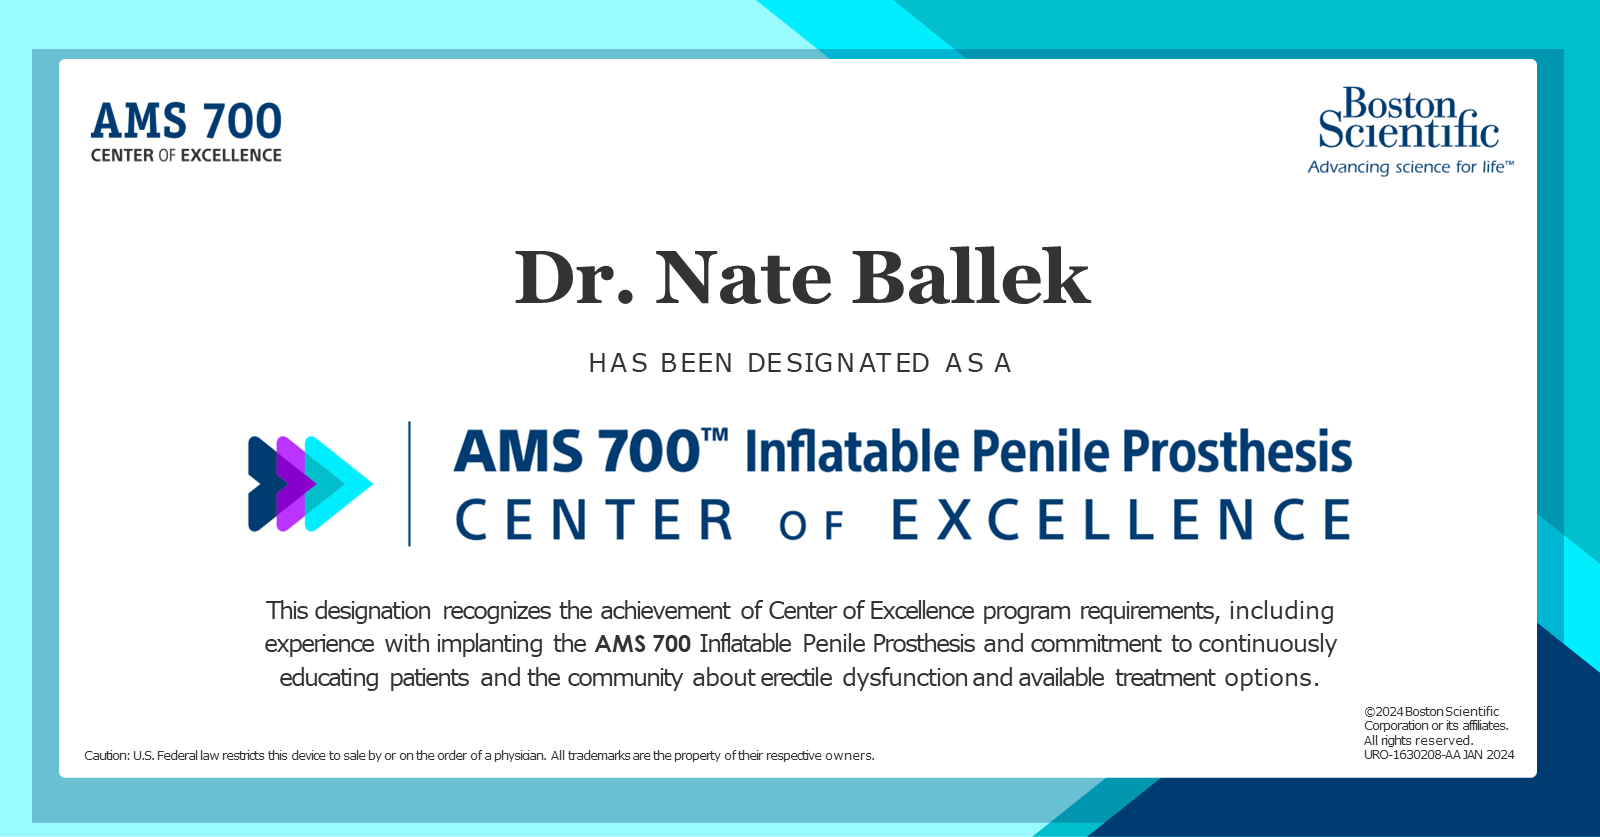 AMS 700 Center of Excellence